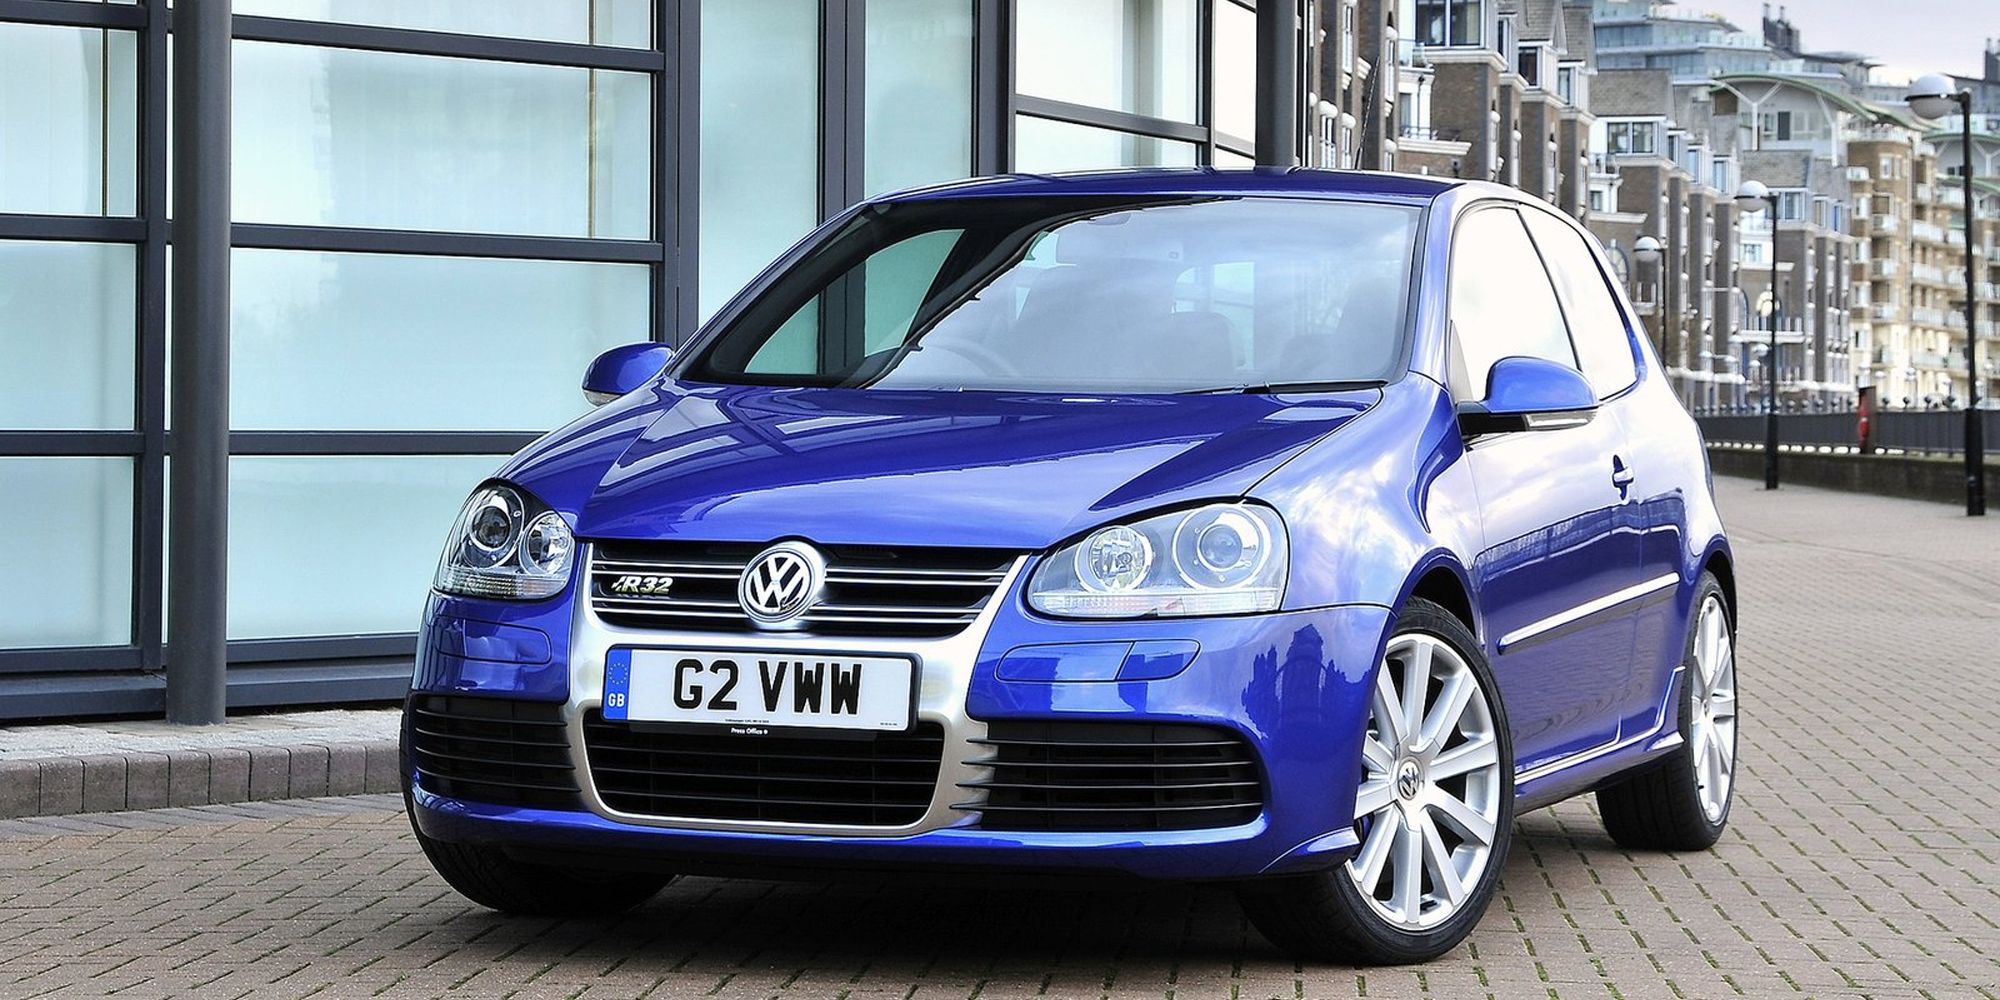 The front of the Mk5 Golf R32